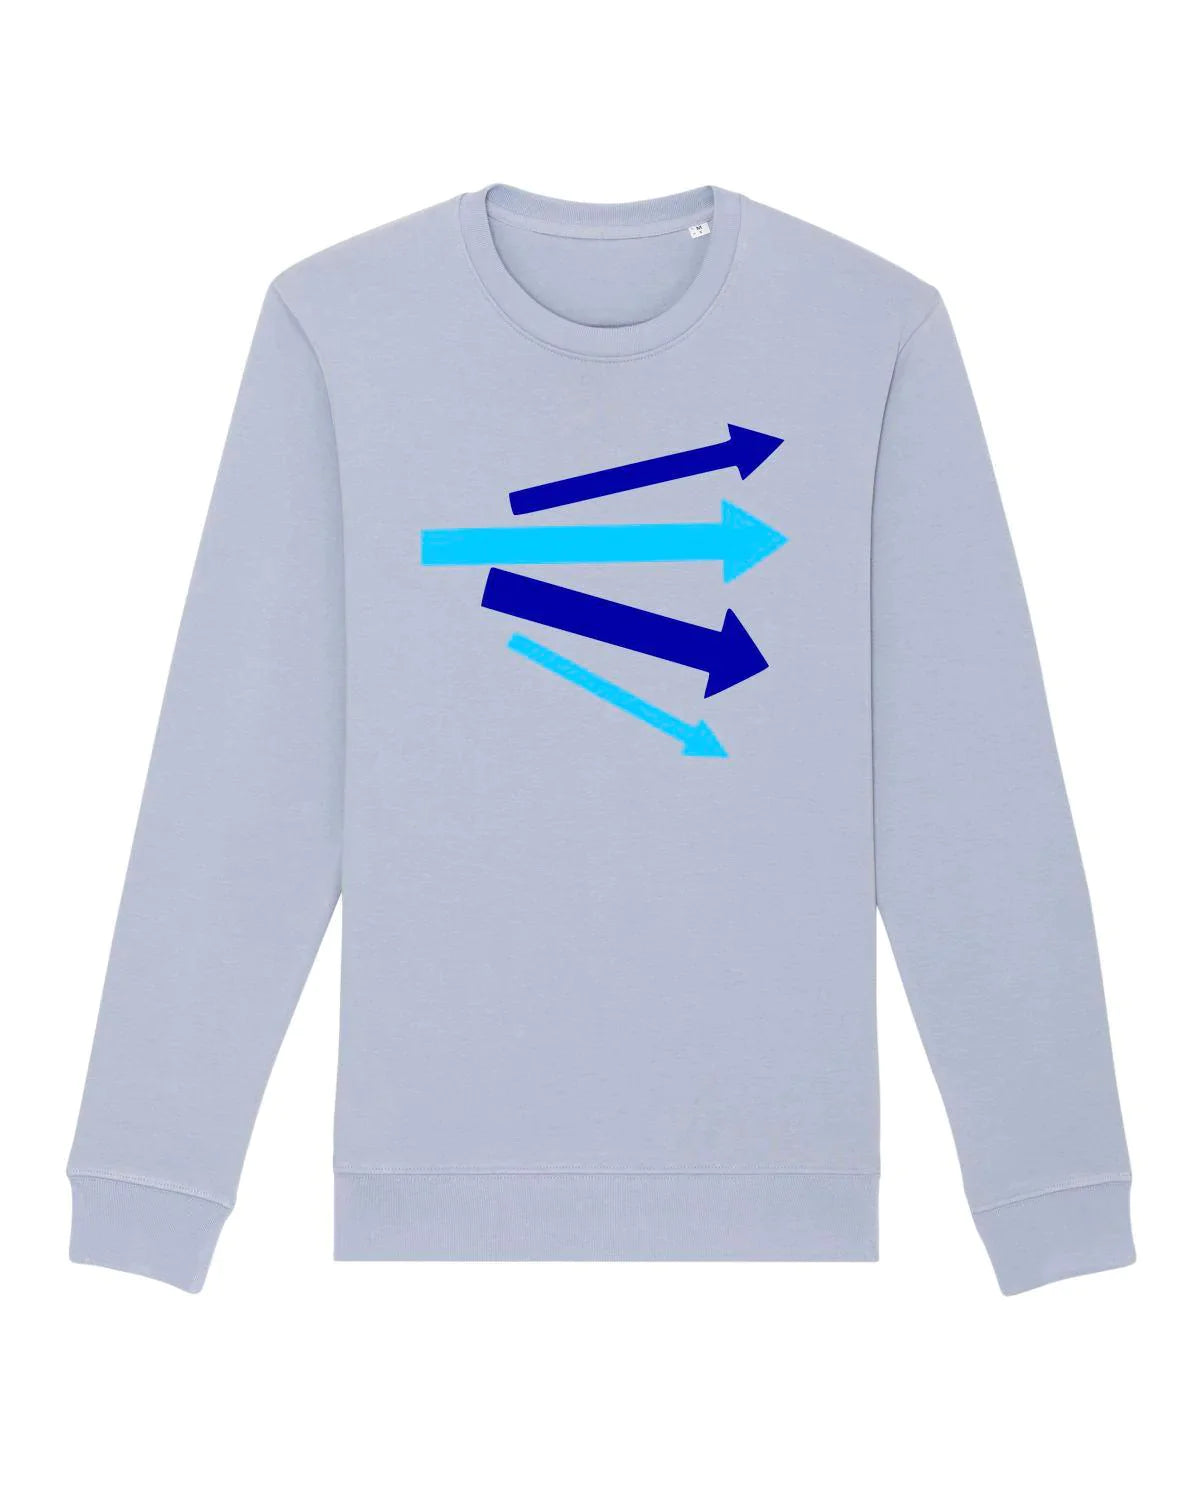 AMSTERDAM ARROWS: Sweatshirt Inspired by The Jam (5 Colour Options) - SOUND IS COLOUR